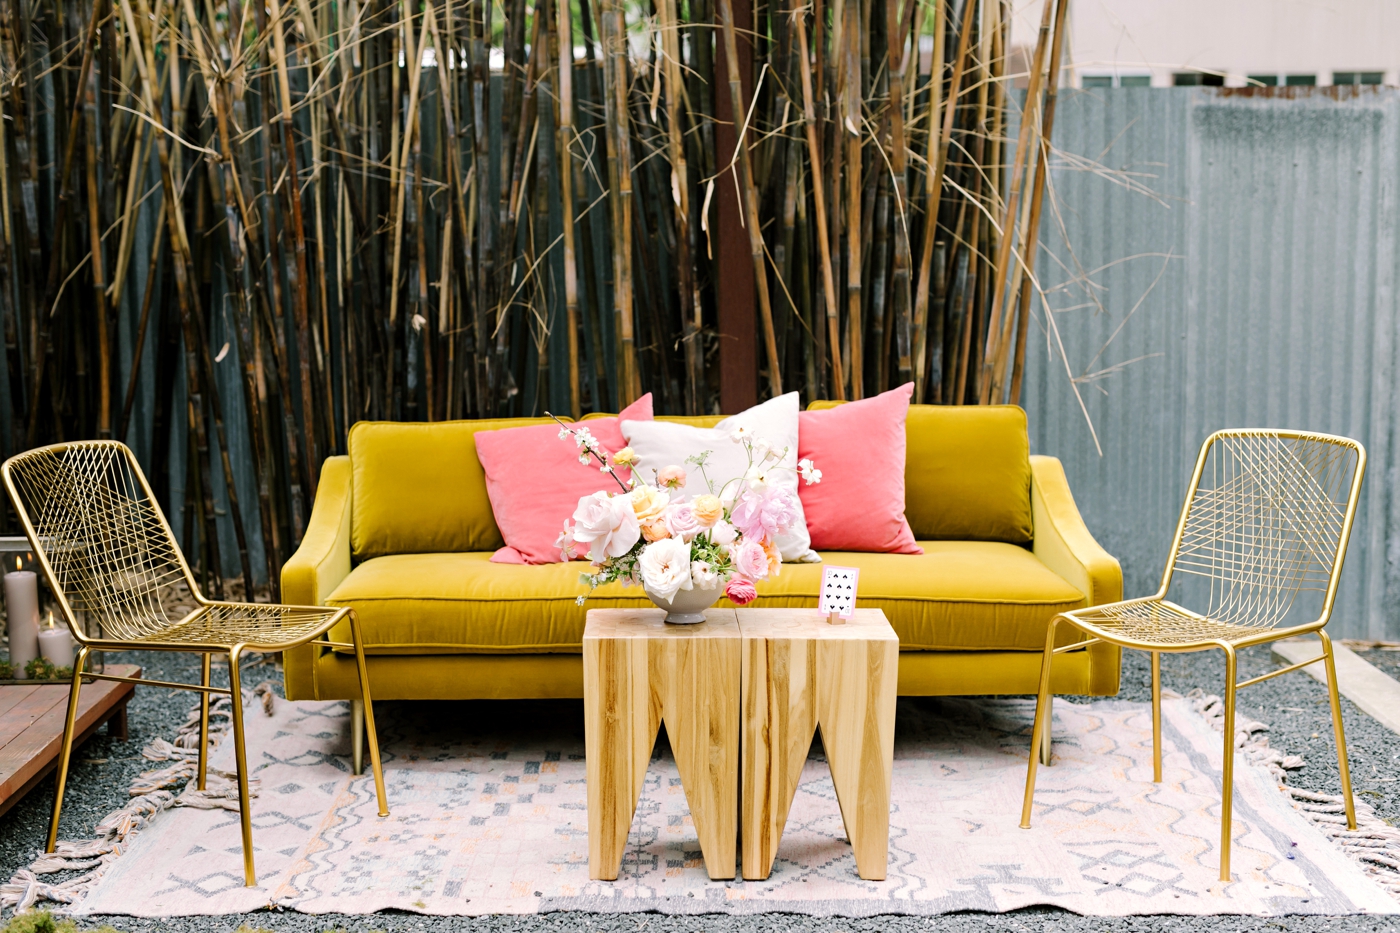 Chic backyard wedding in Austin with mismatched midcentury decor